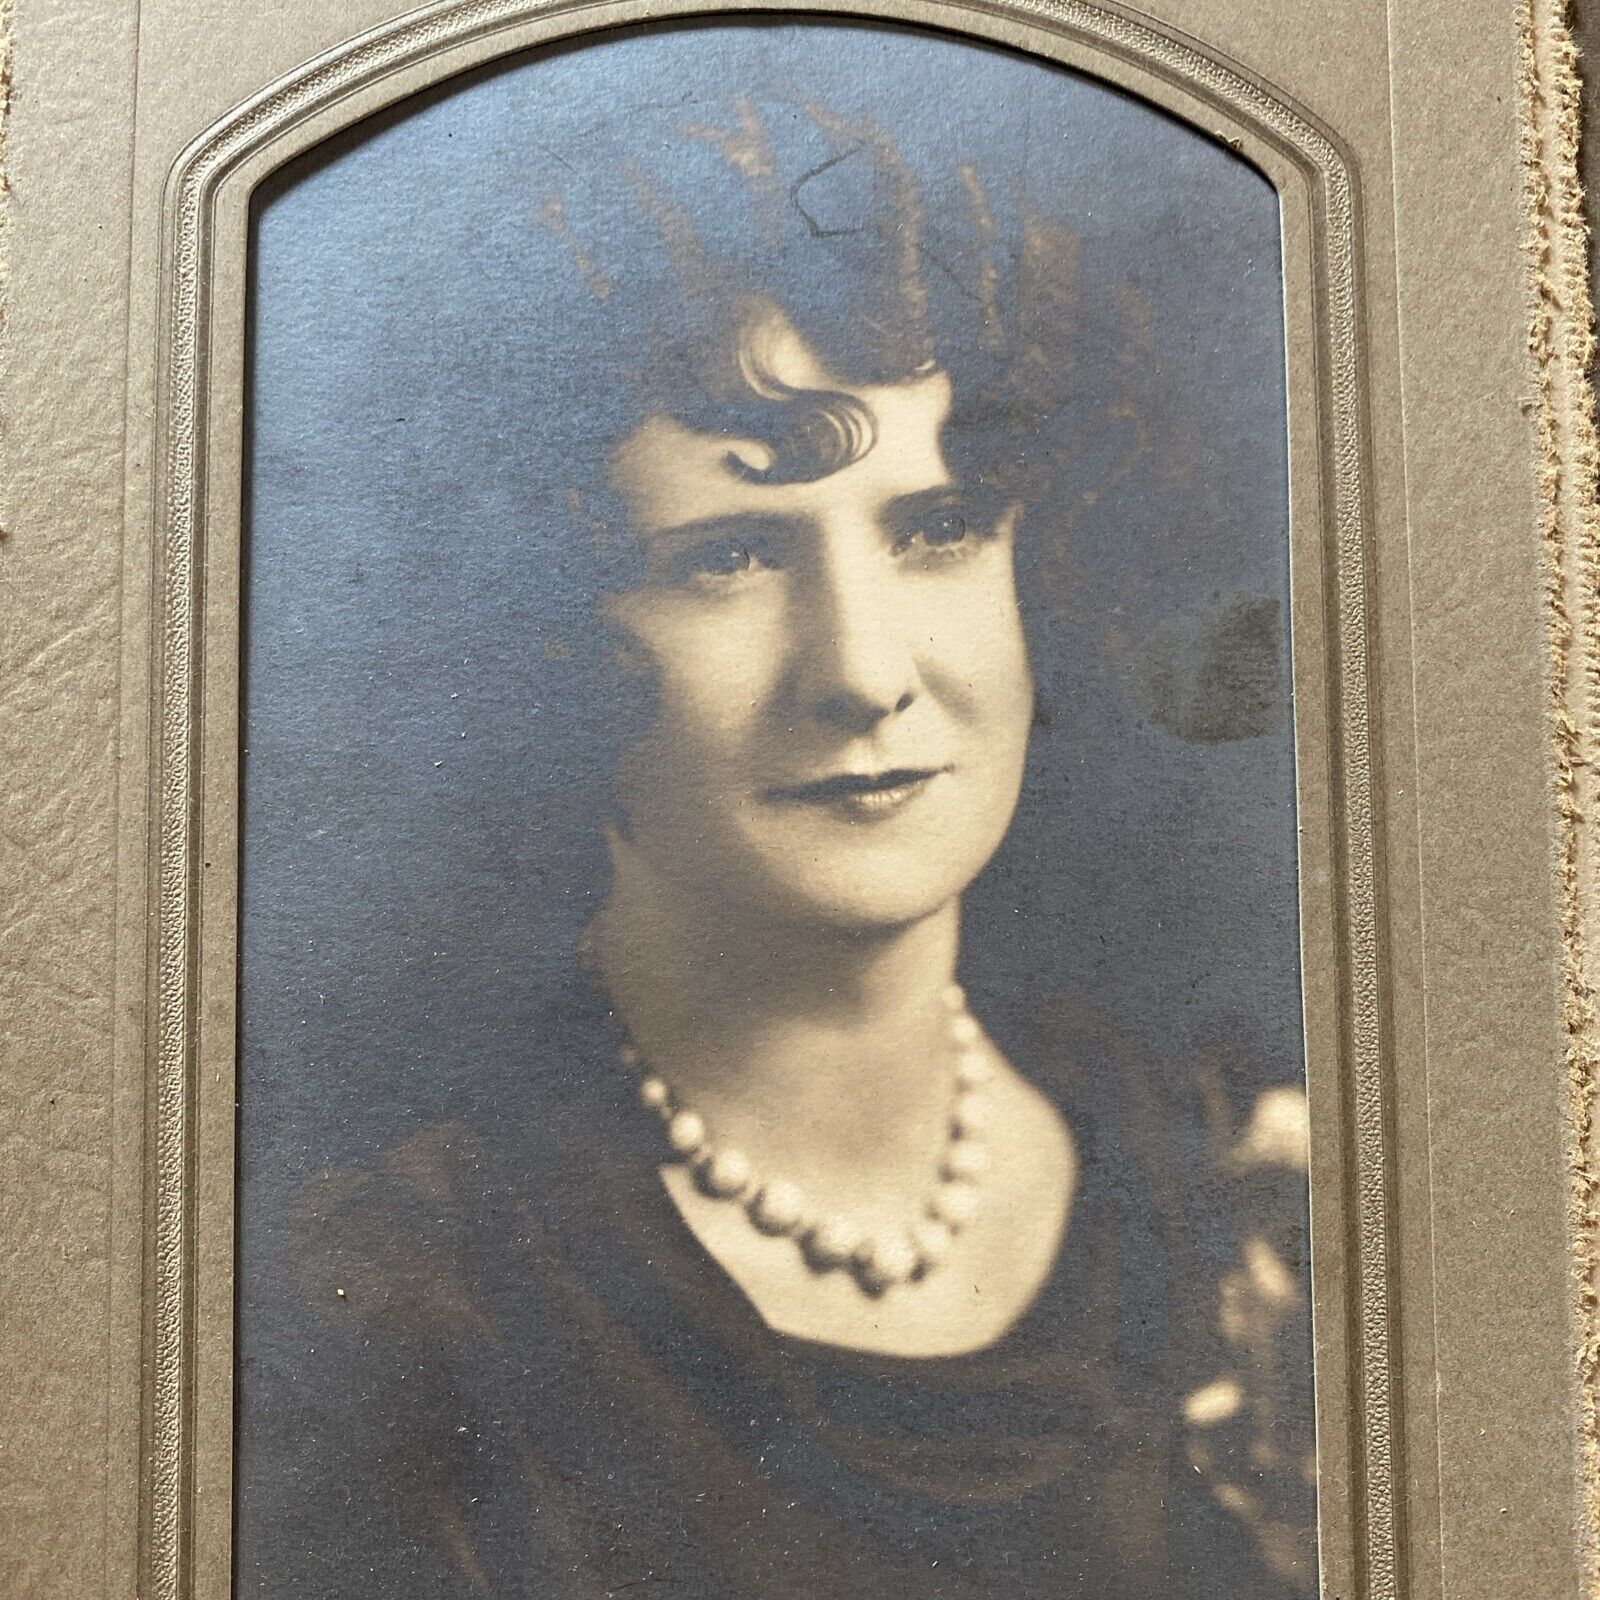 Vintage 1920s Photograph Portrait Of Woman With Pearls Kansas